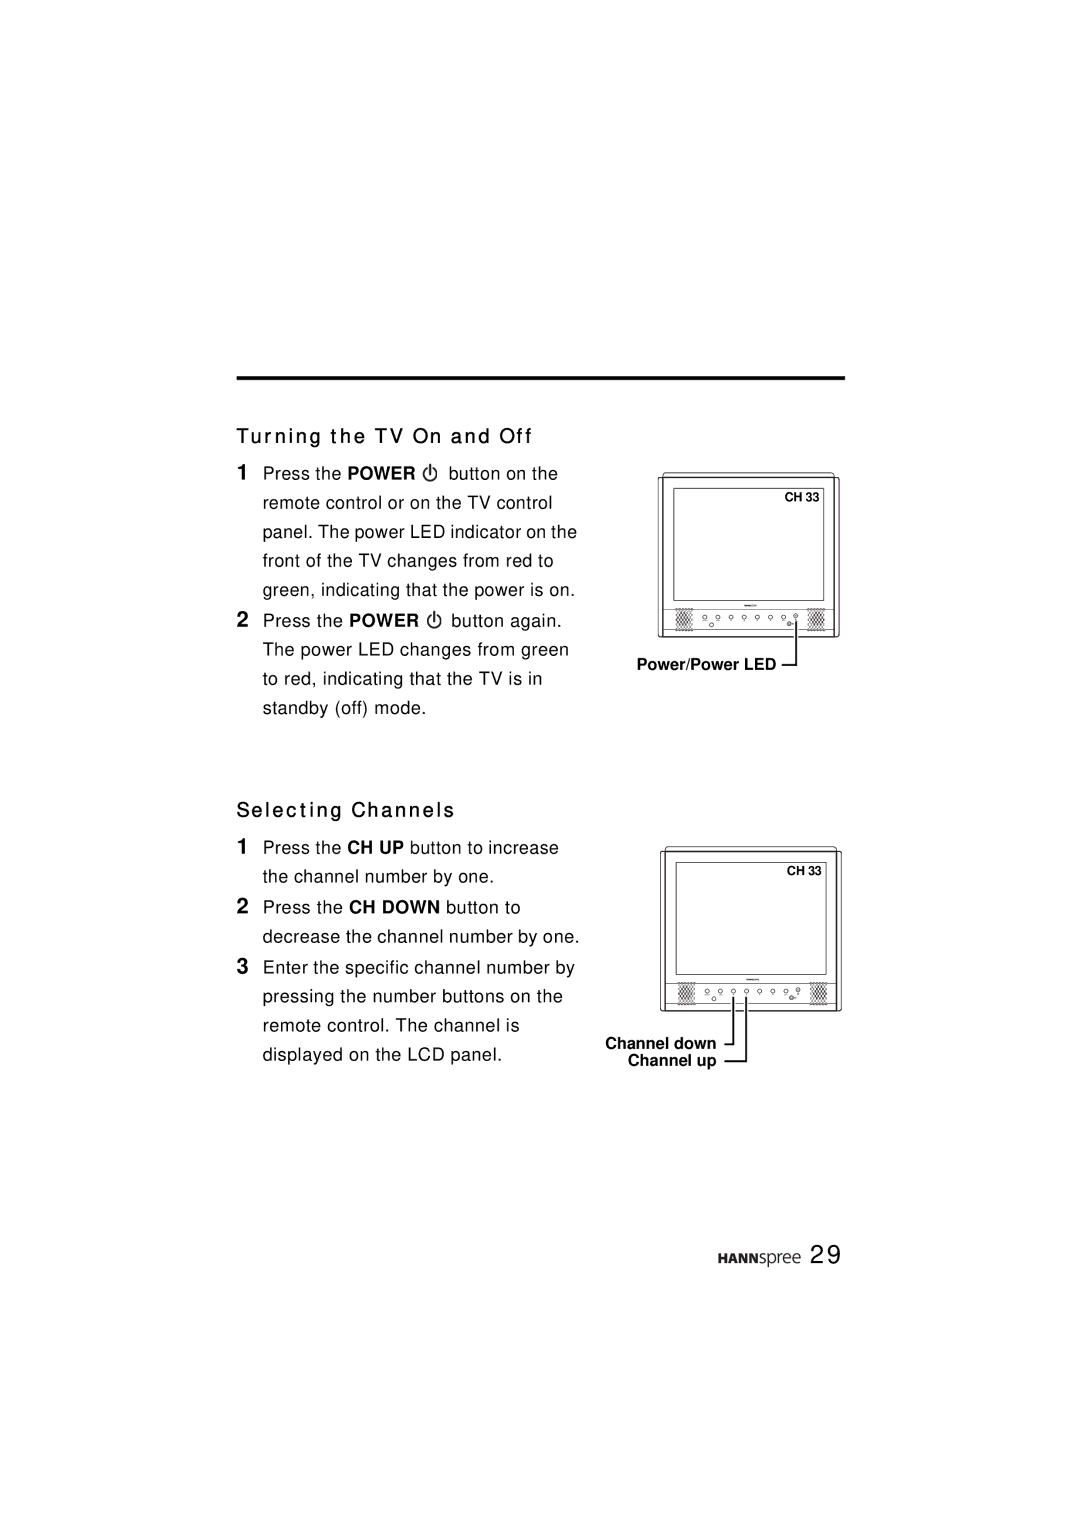 HANNspree ST31-15A1 user manual Turning the TV On and Off, Selecting Channels 